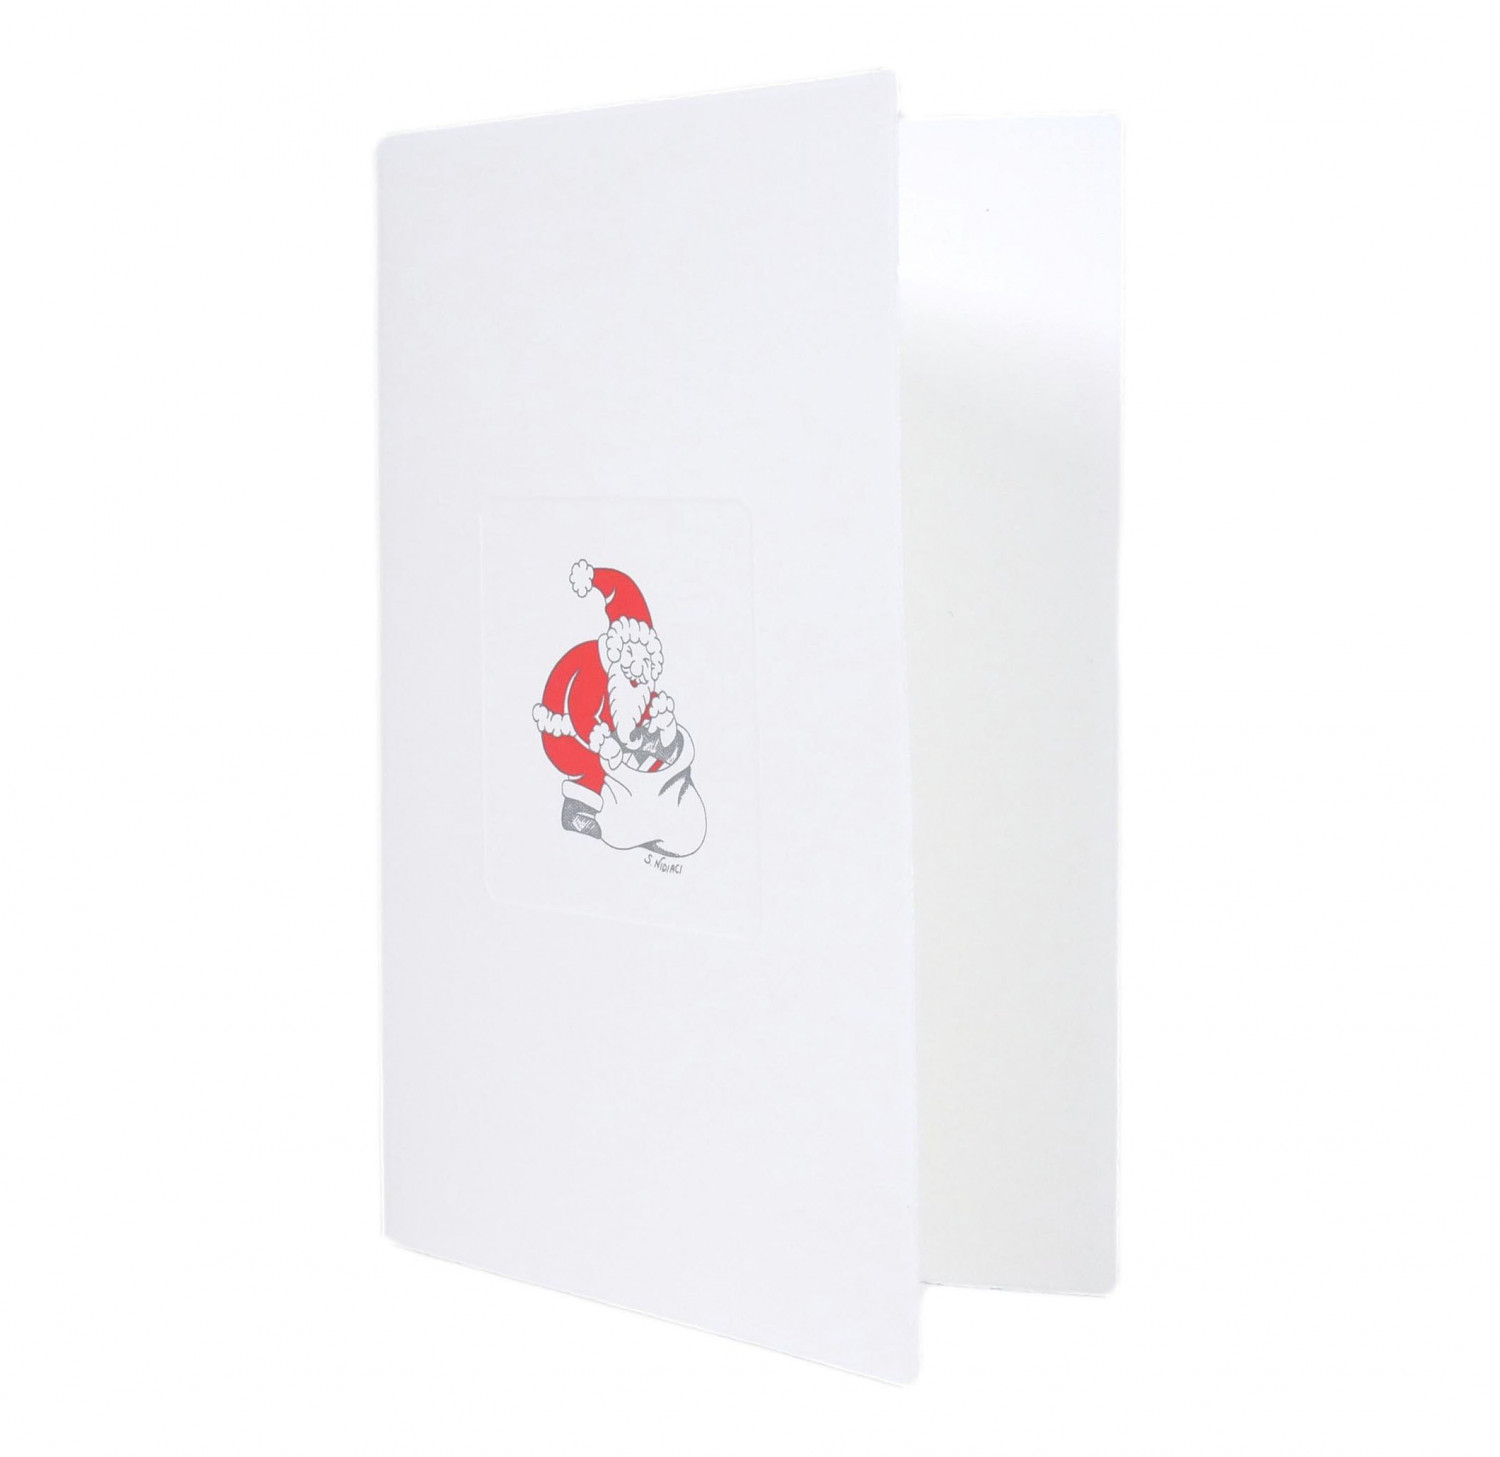 BGL+BST BABBO NATALE ROSSO-BIANCO-DONI